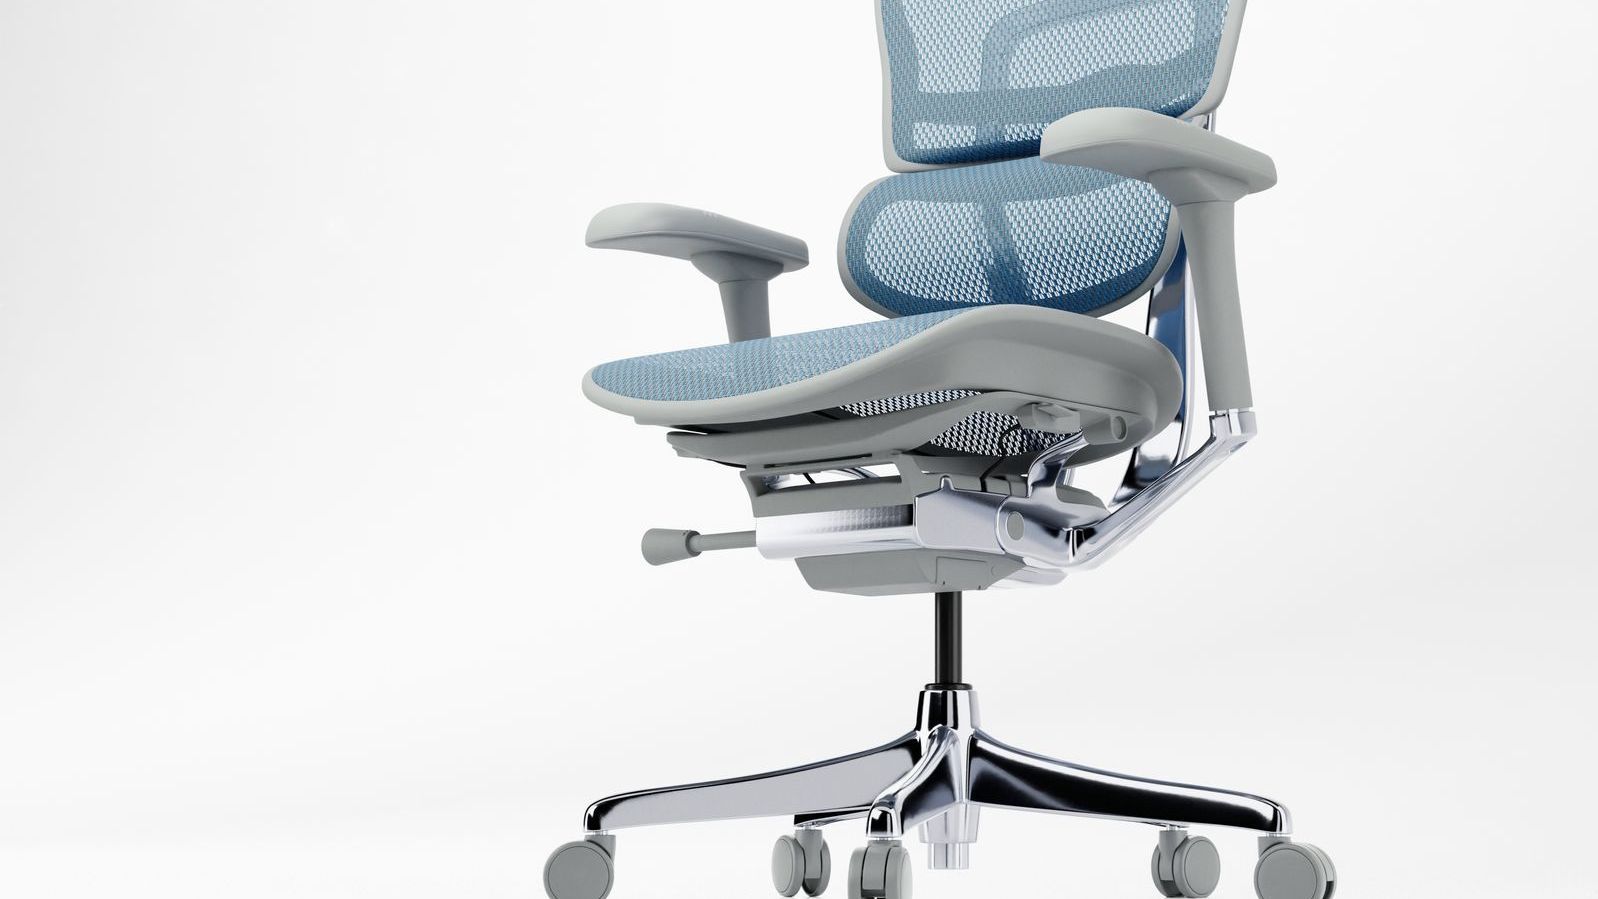 Ergohuman Elite office chair with a grey frame and blue mesh upholstery, facing front left 45-degree angle